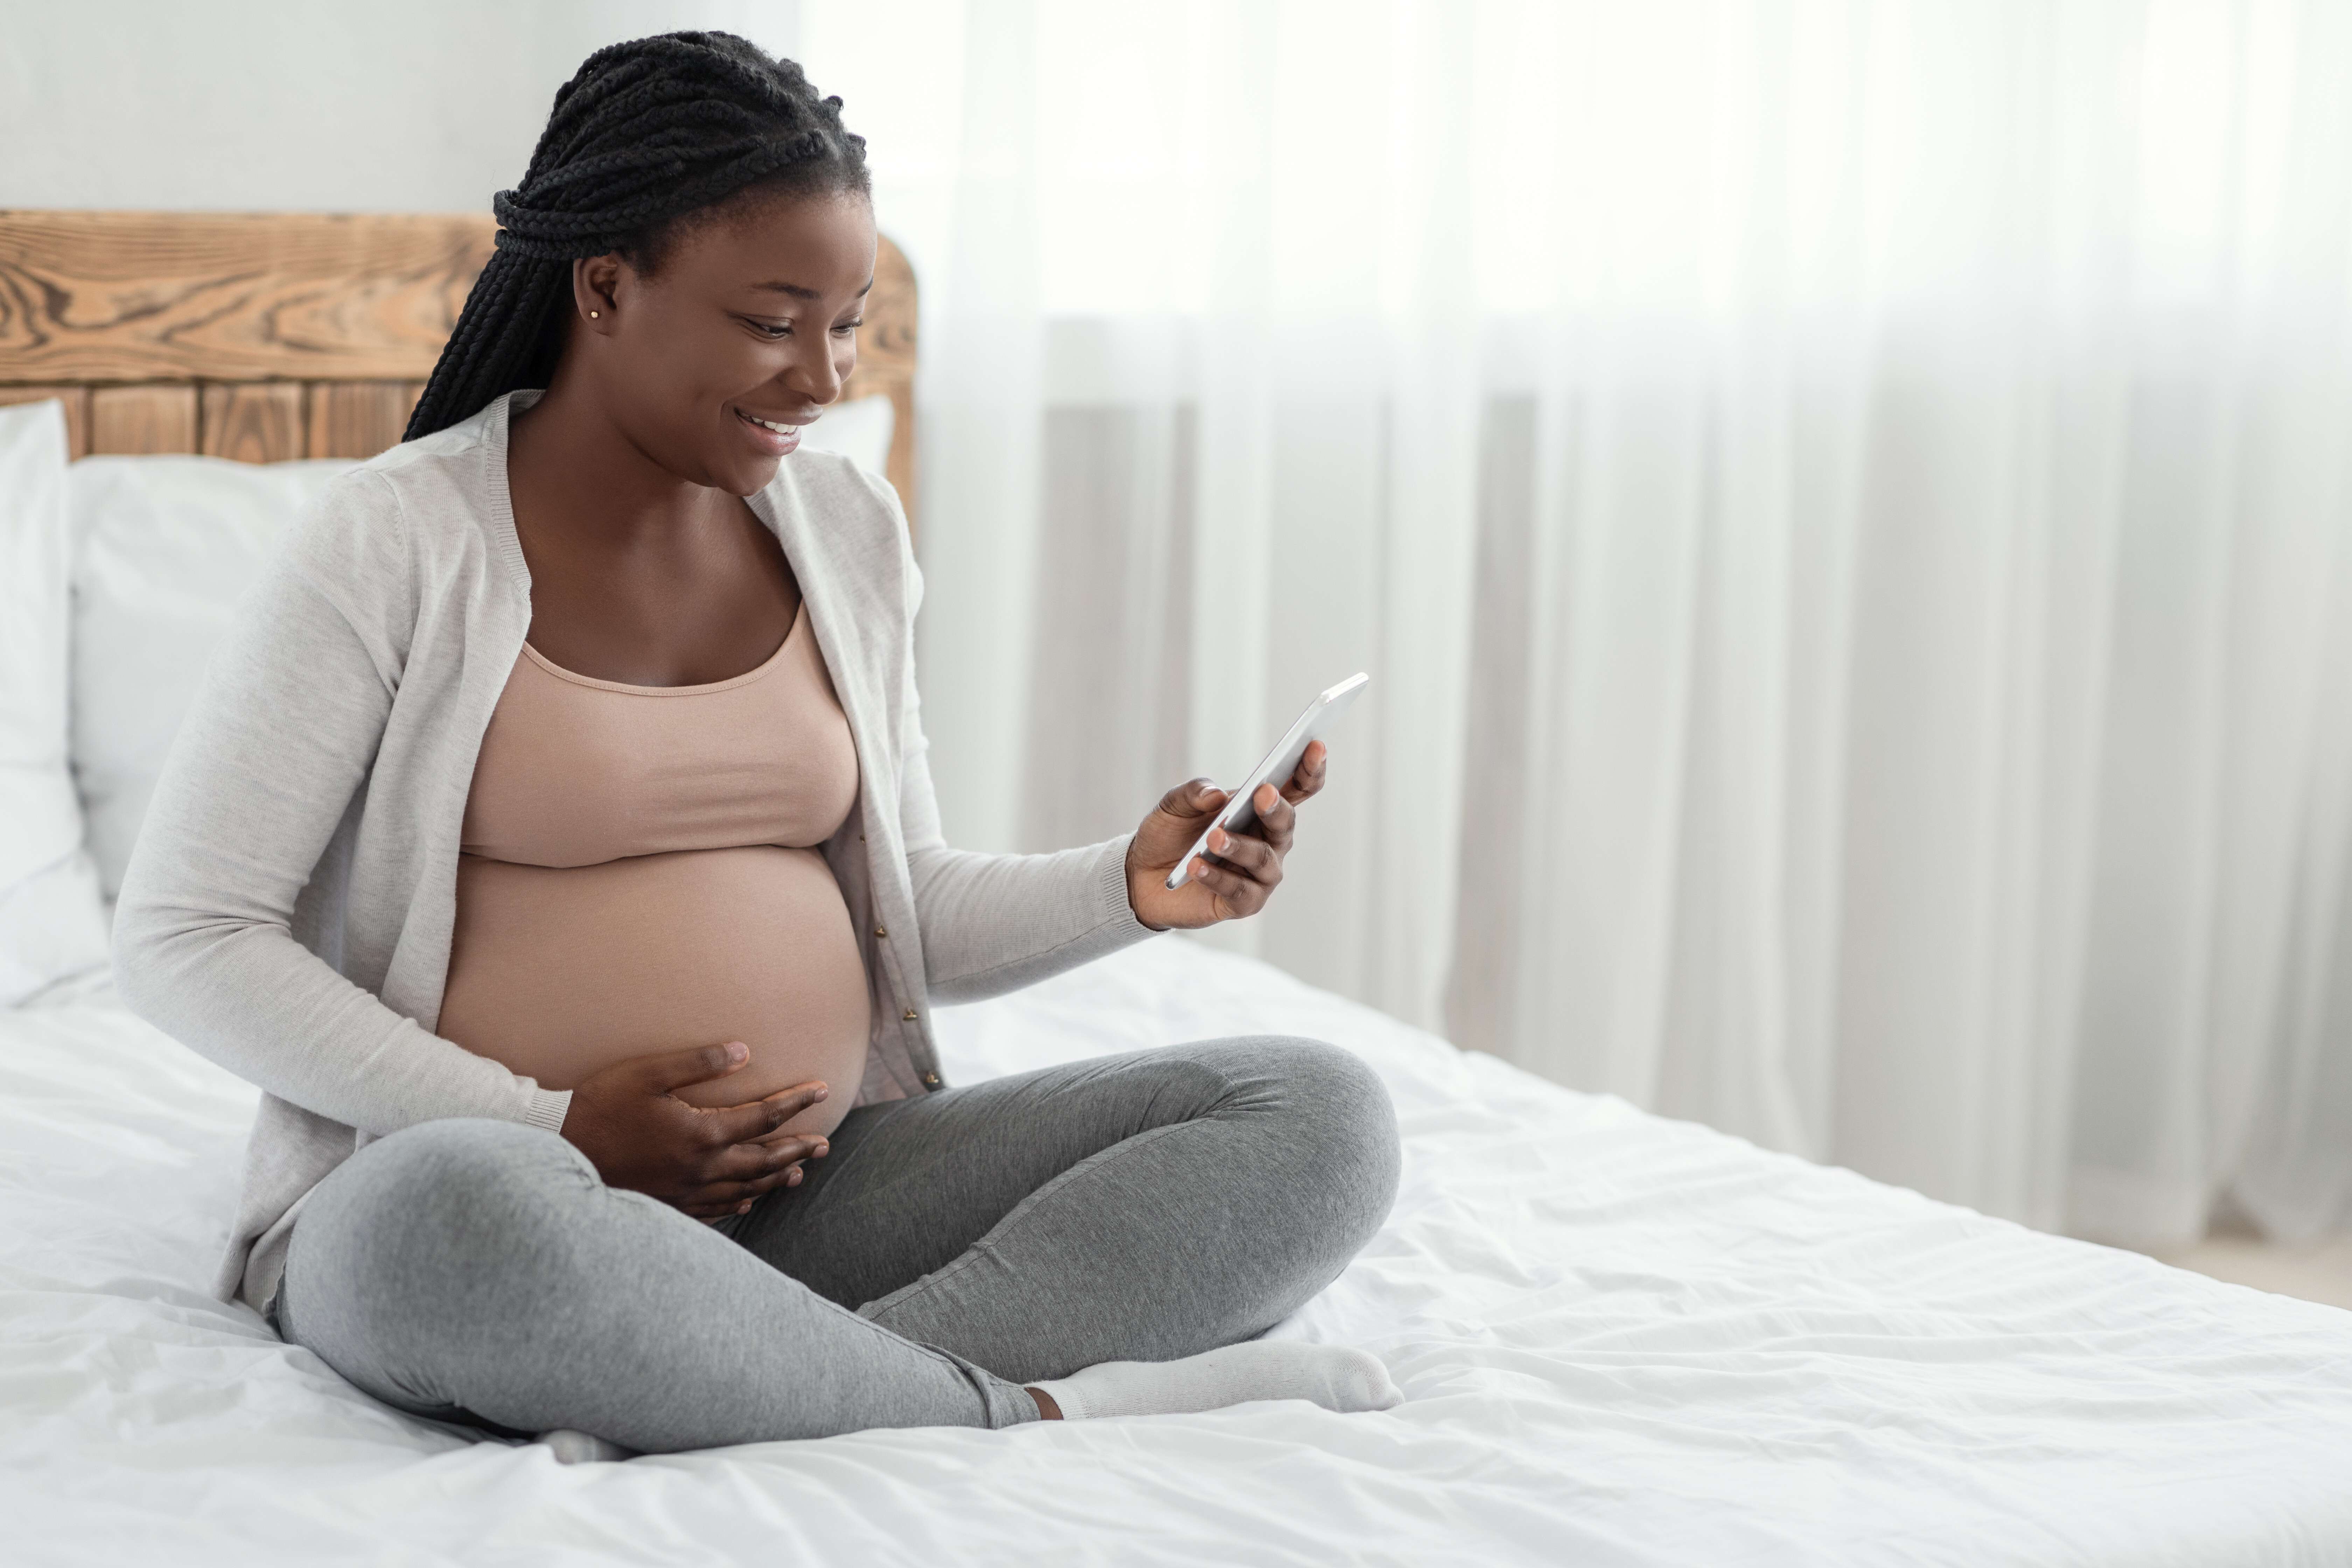 woman sitting on bed looking up the surrogacy process on her phone